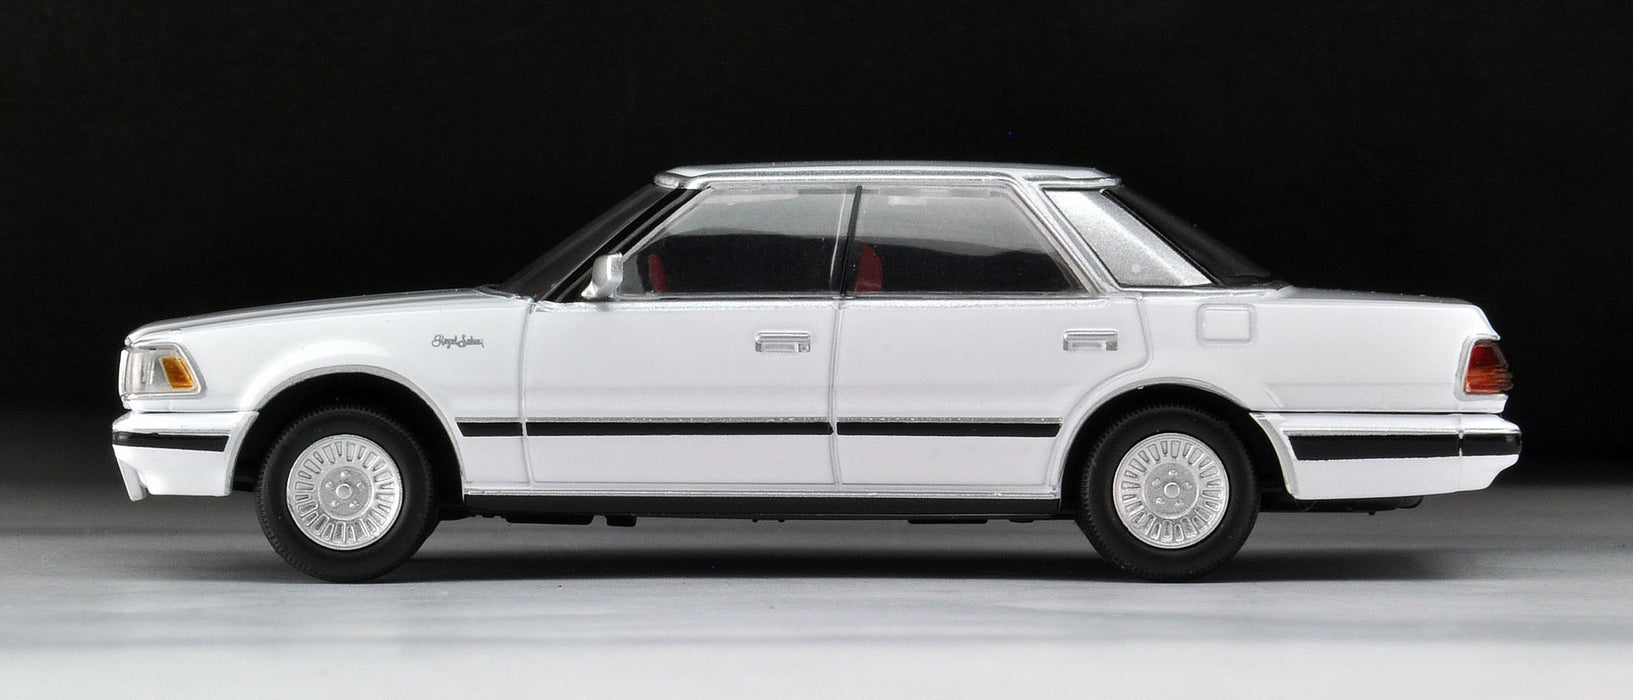 Tomytec 1/64 Scale Toyota Crown Hardtop Royal Saloon in White - Limited Vintage Neo